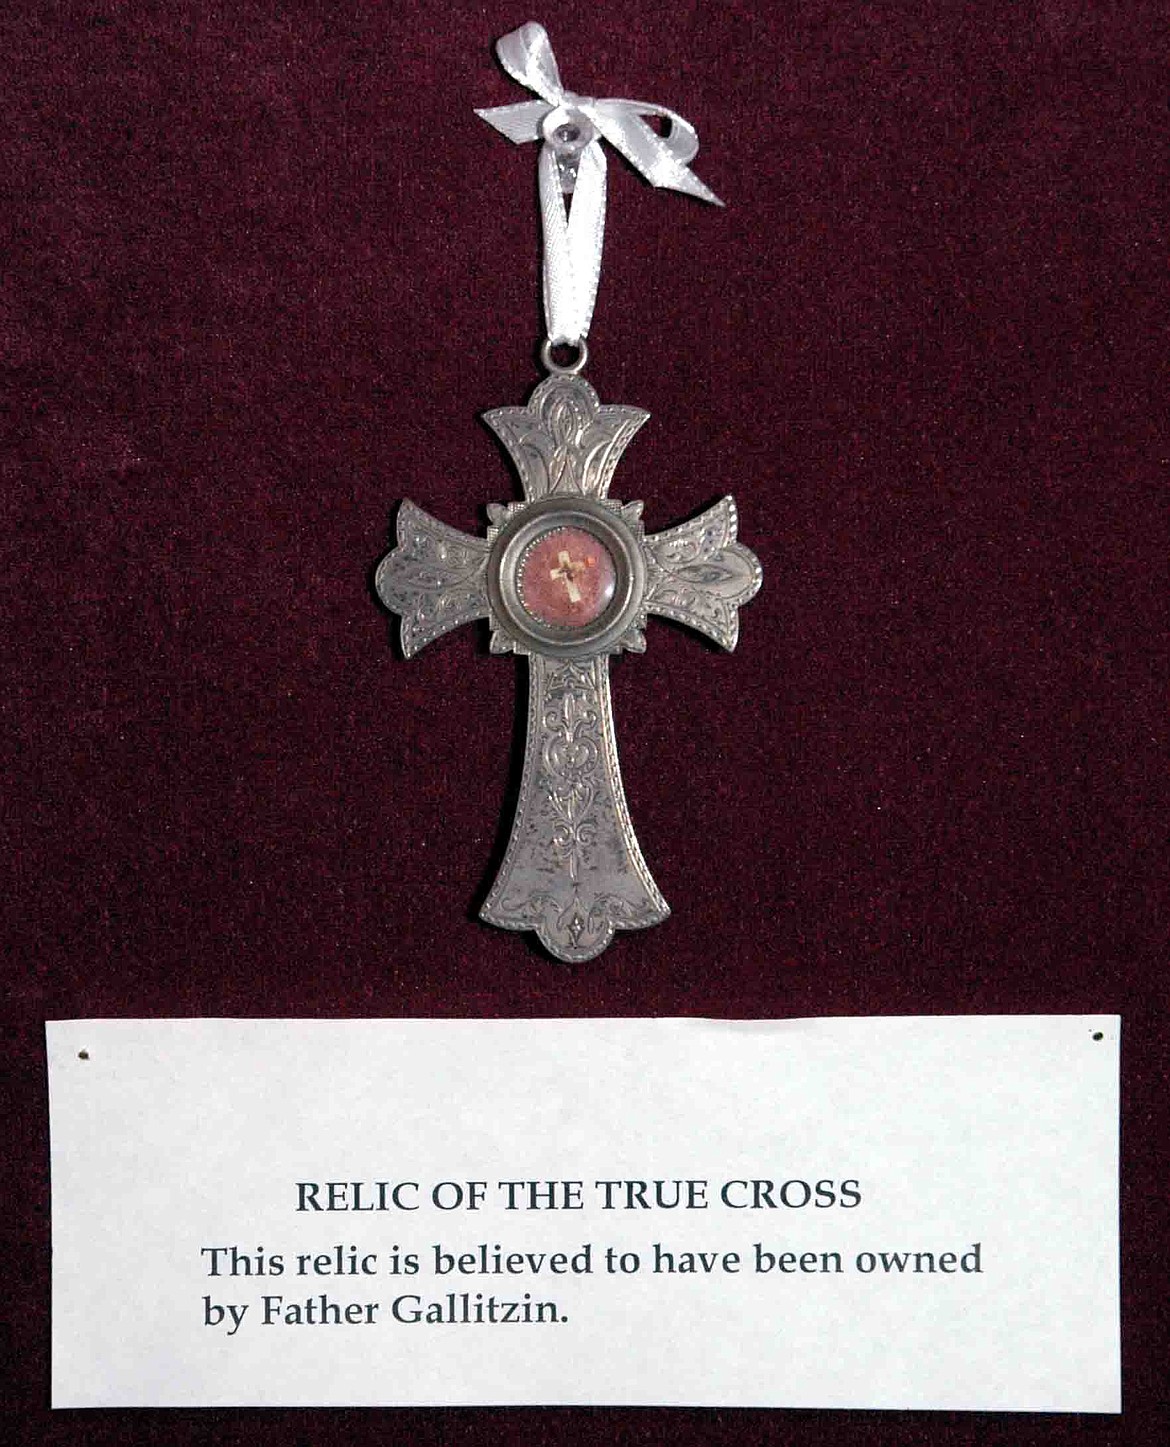 Pendant owned by Holland-born American priest Demetrius Augustine Gallitzin (1770-1840), believed to contain a fragment of the true cross on which Jesus was crucified that was discovered by Roman Emperor Constantine’s mother, Helen.